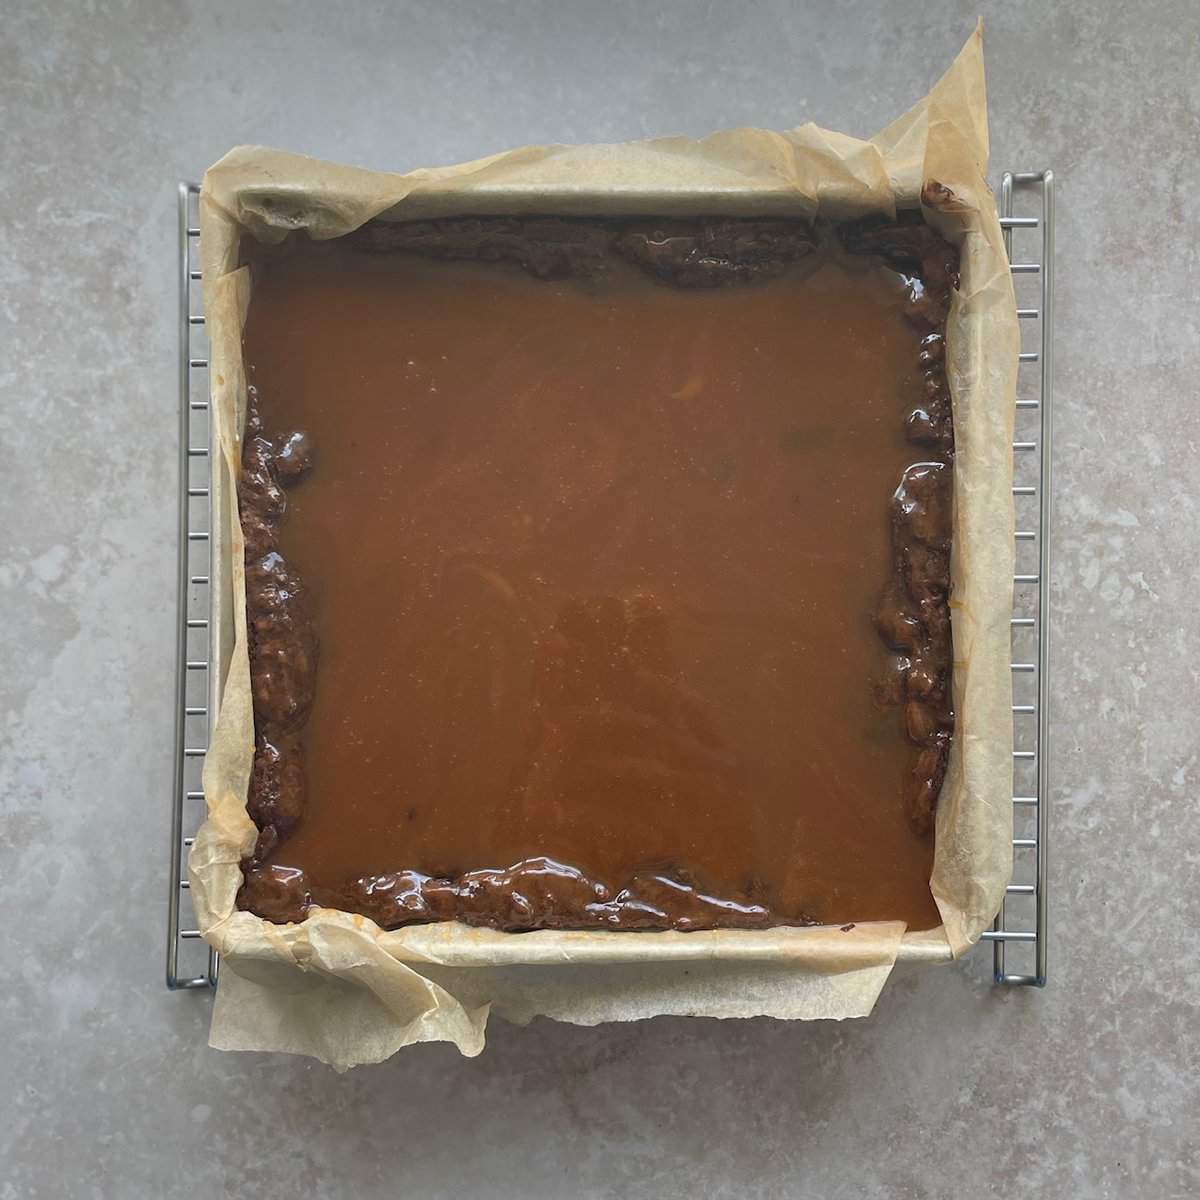 pan of espresso brownies covered in liquid caramel in a pan lined with parchment paper.